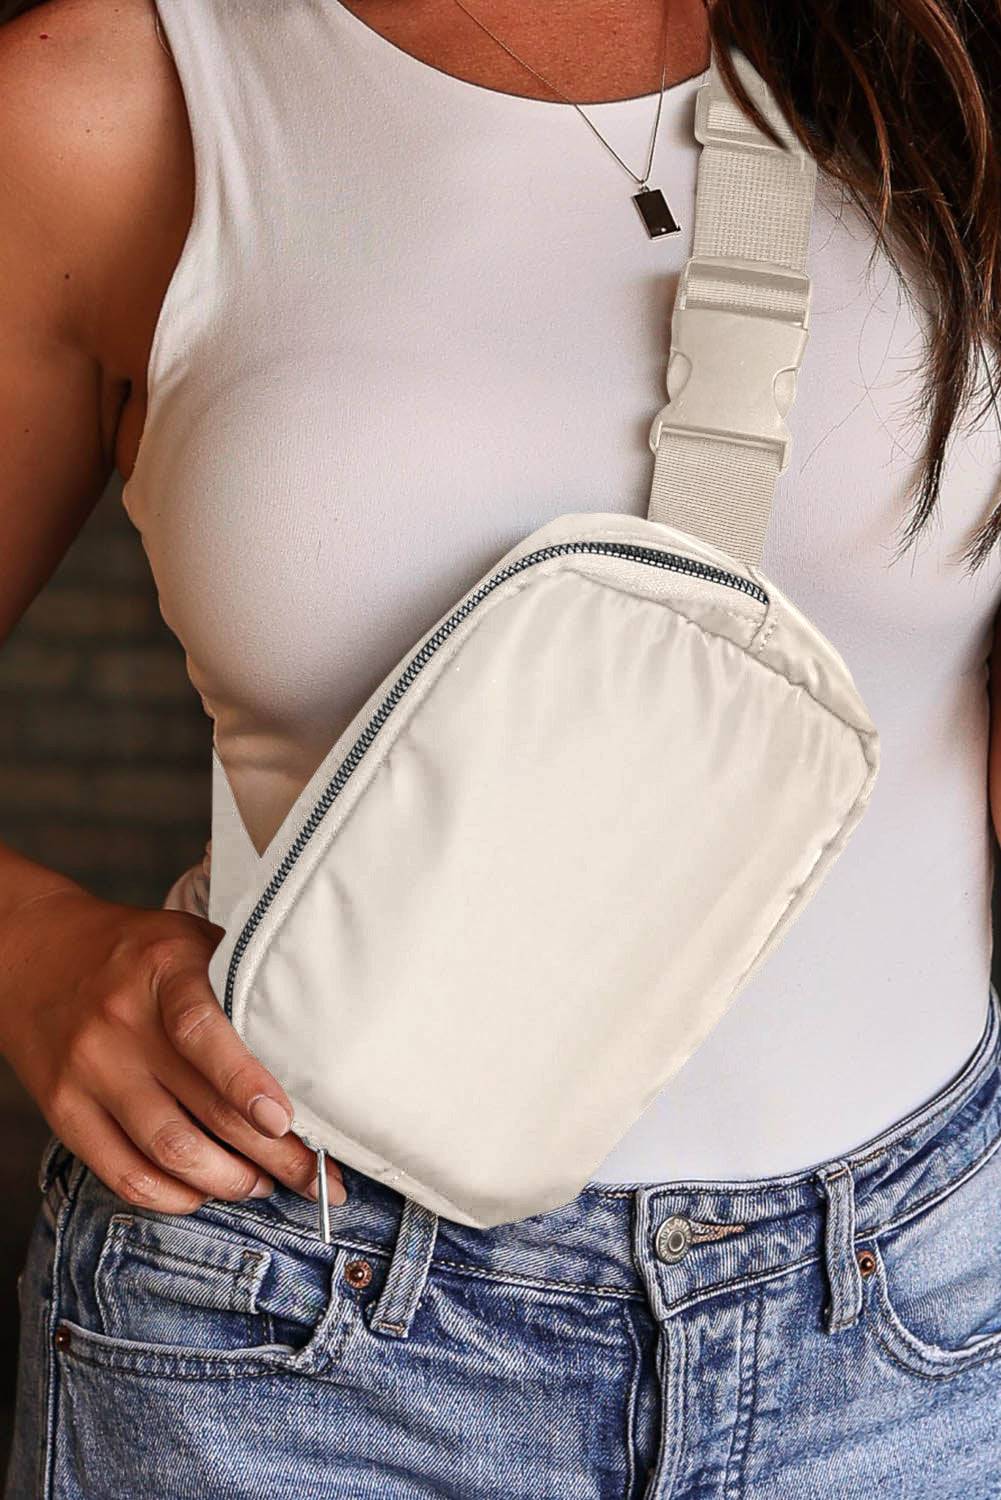 a woman in a white tank top is holding a white fanny bag